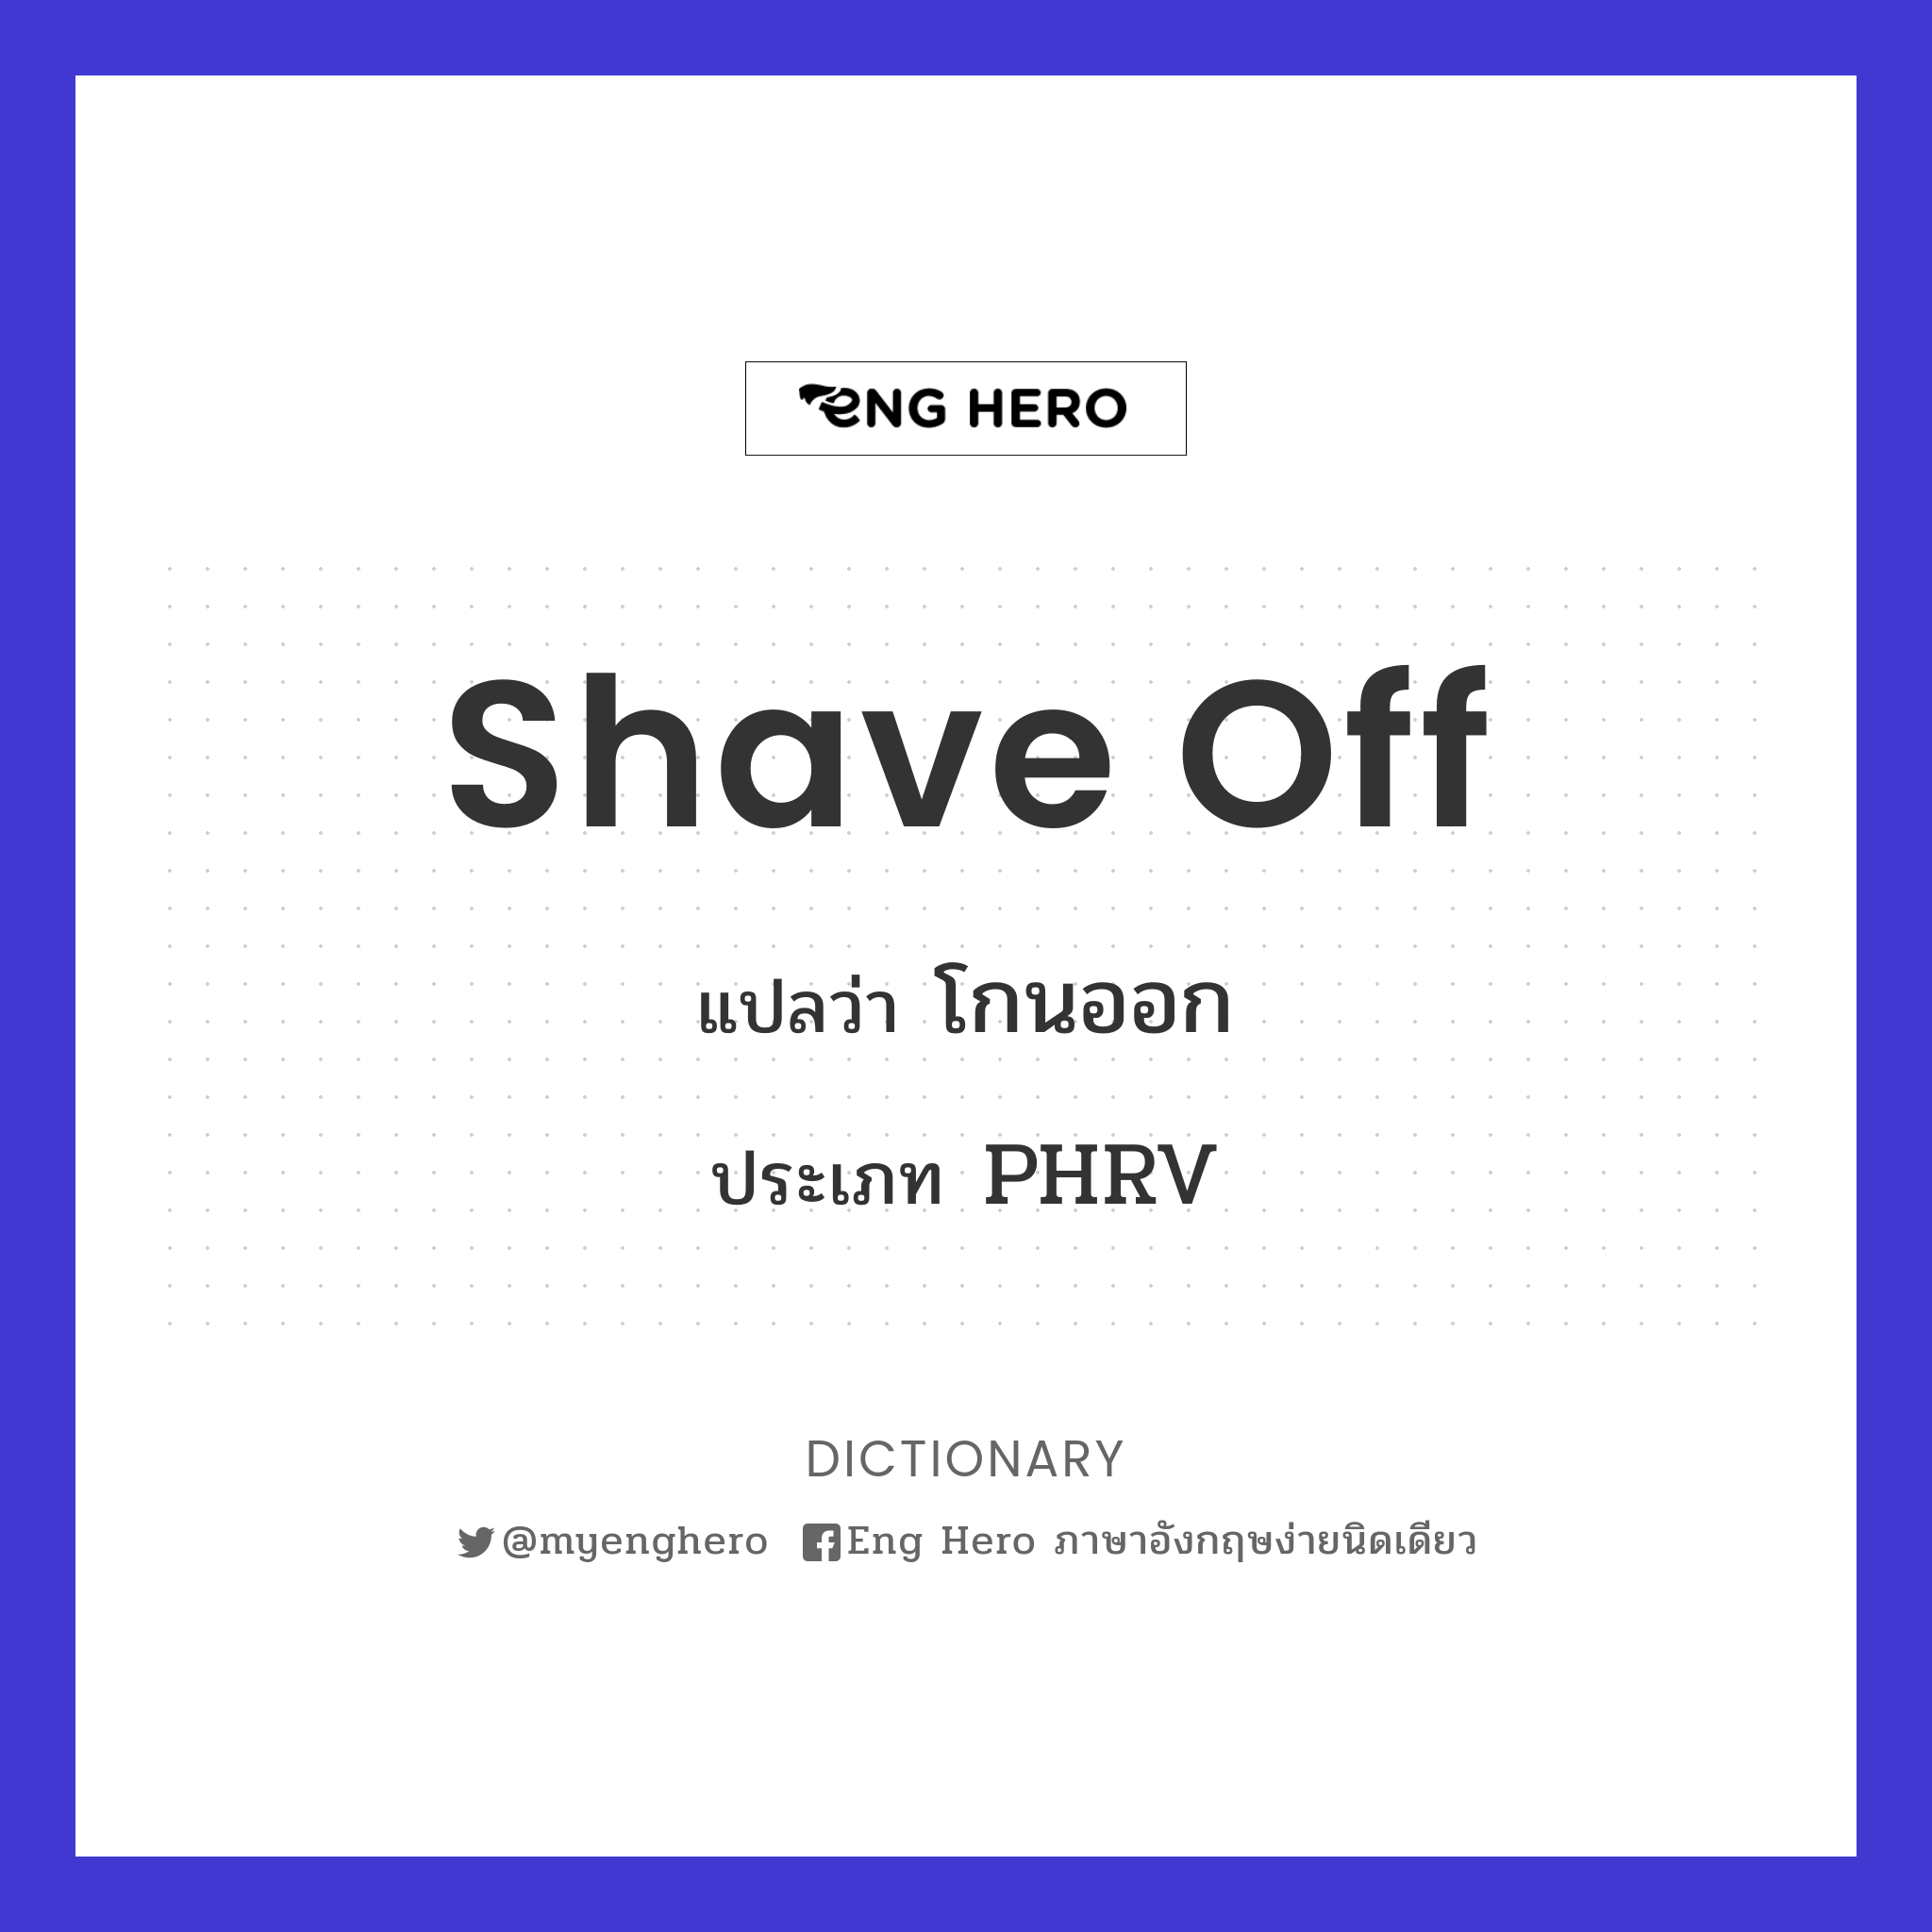 shave off